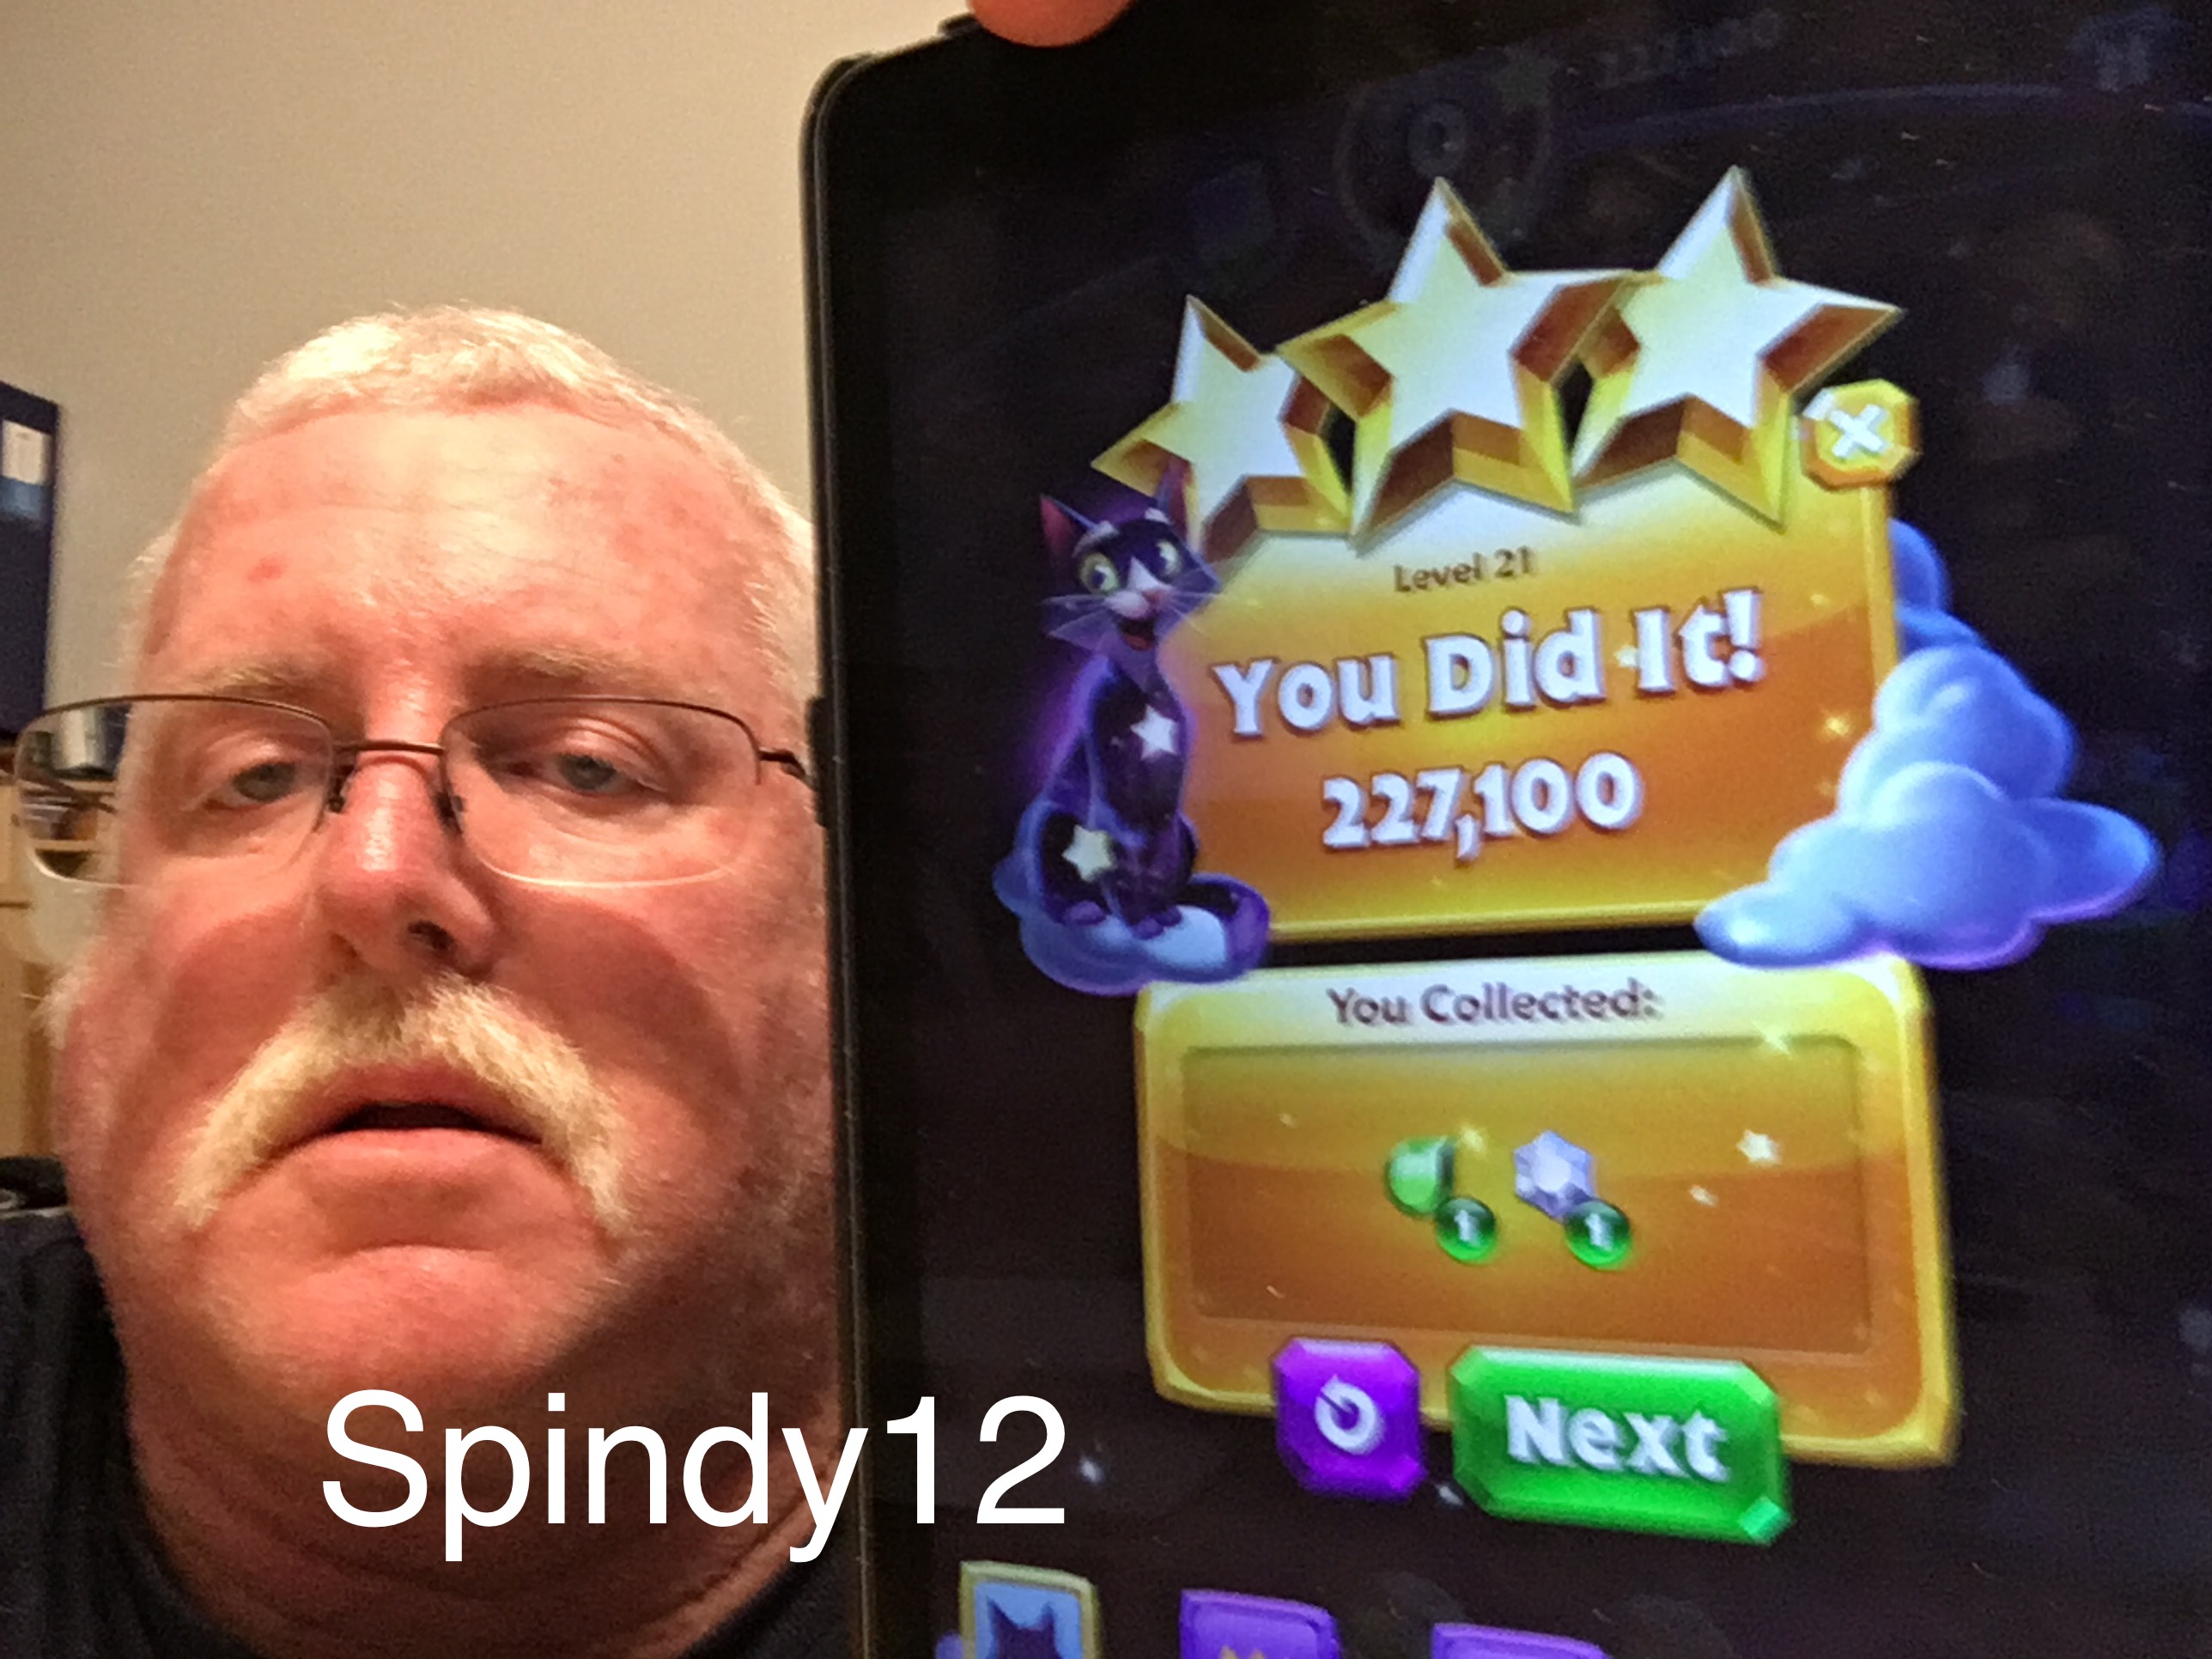 Spindy12: Bejeweled Stars: Level 21 - Mix It Up (iOS) 227,100 points on 2016-12-25 08:01:40